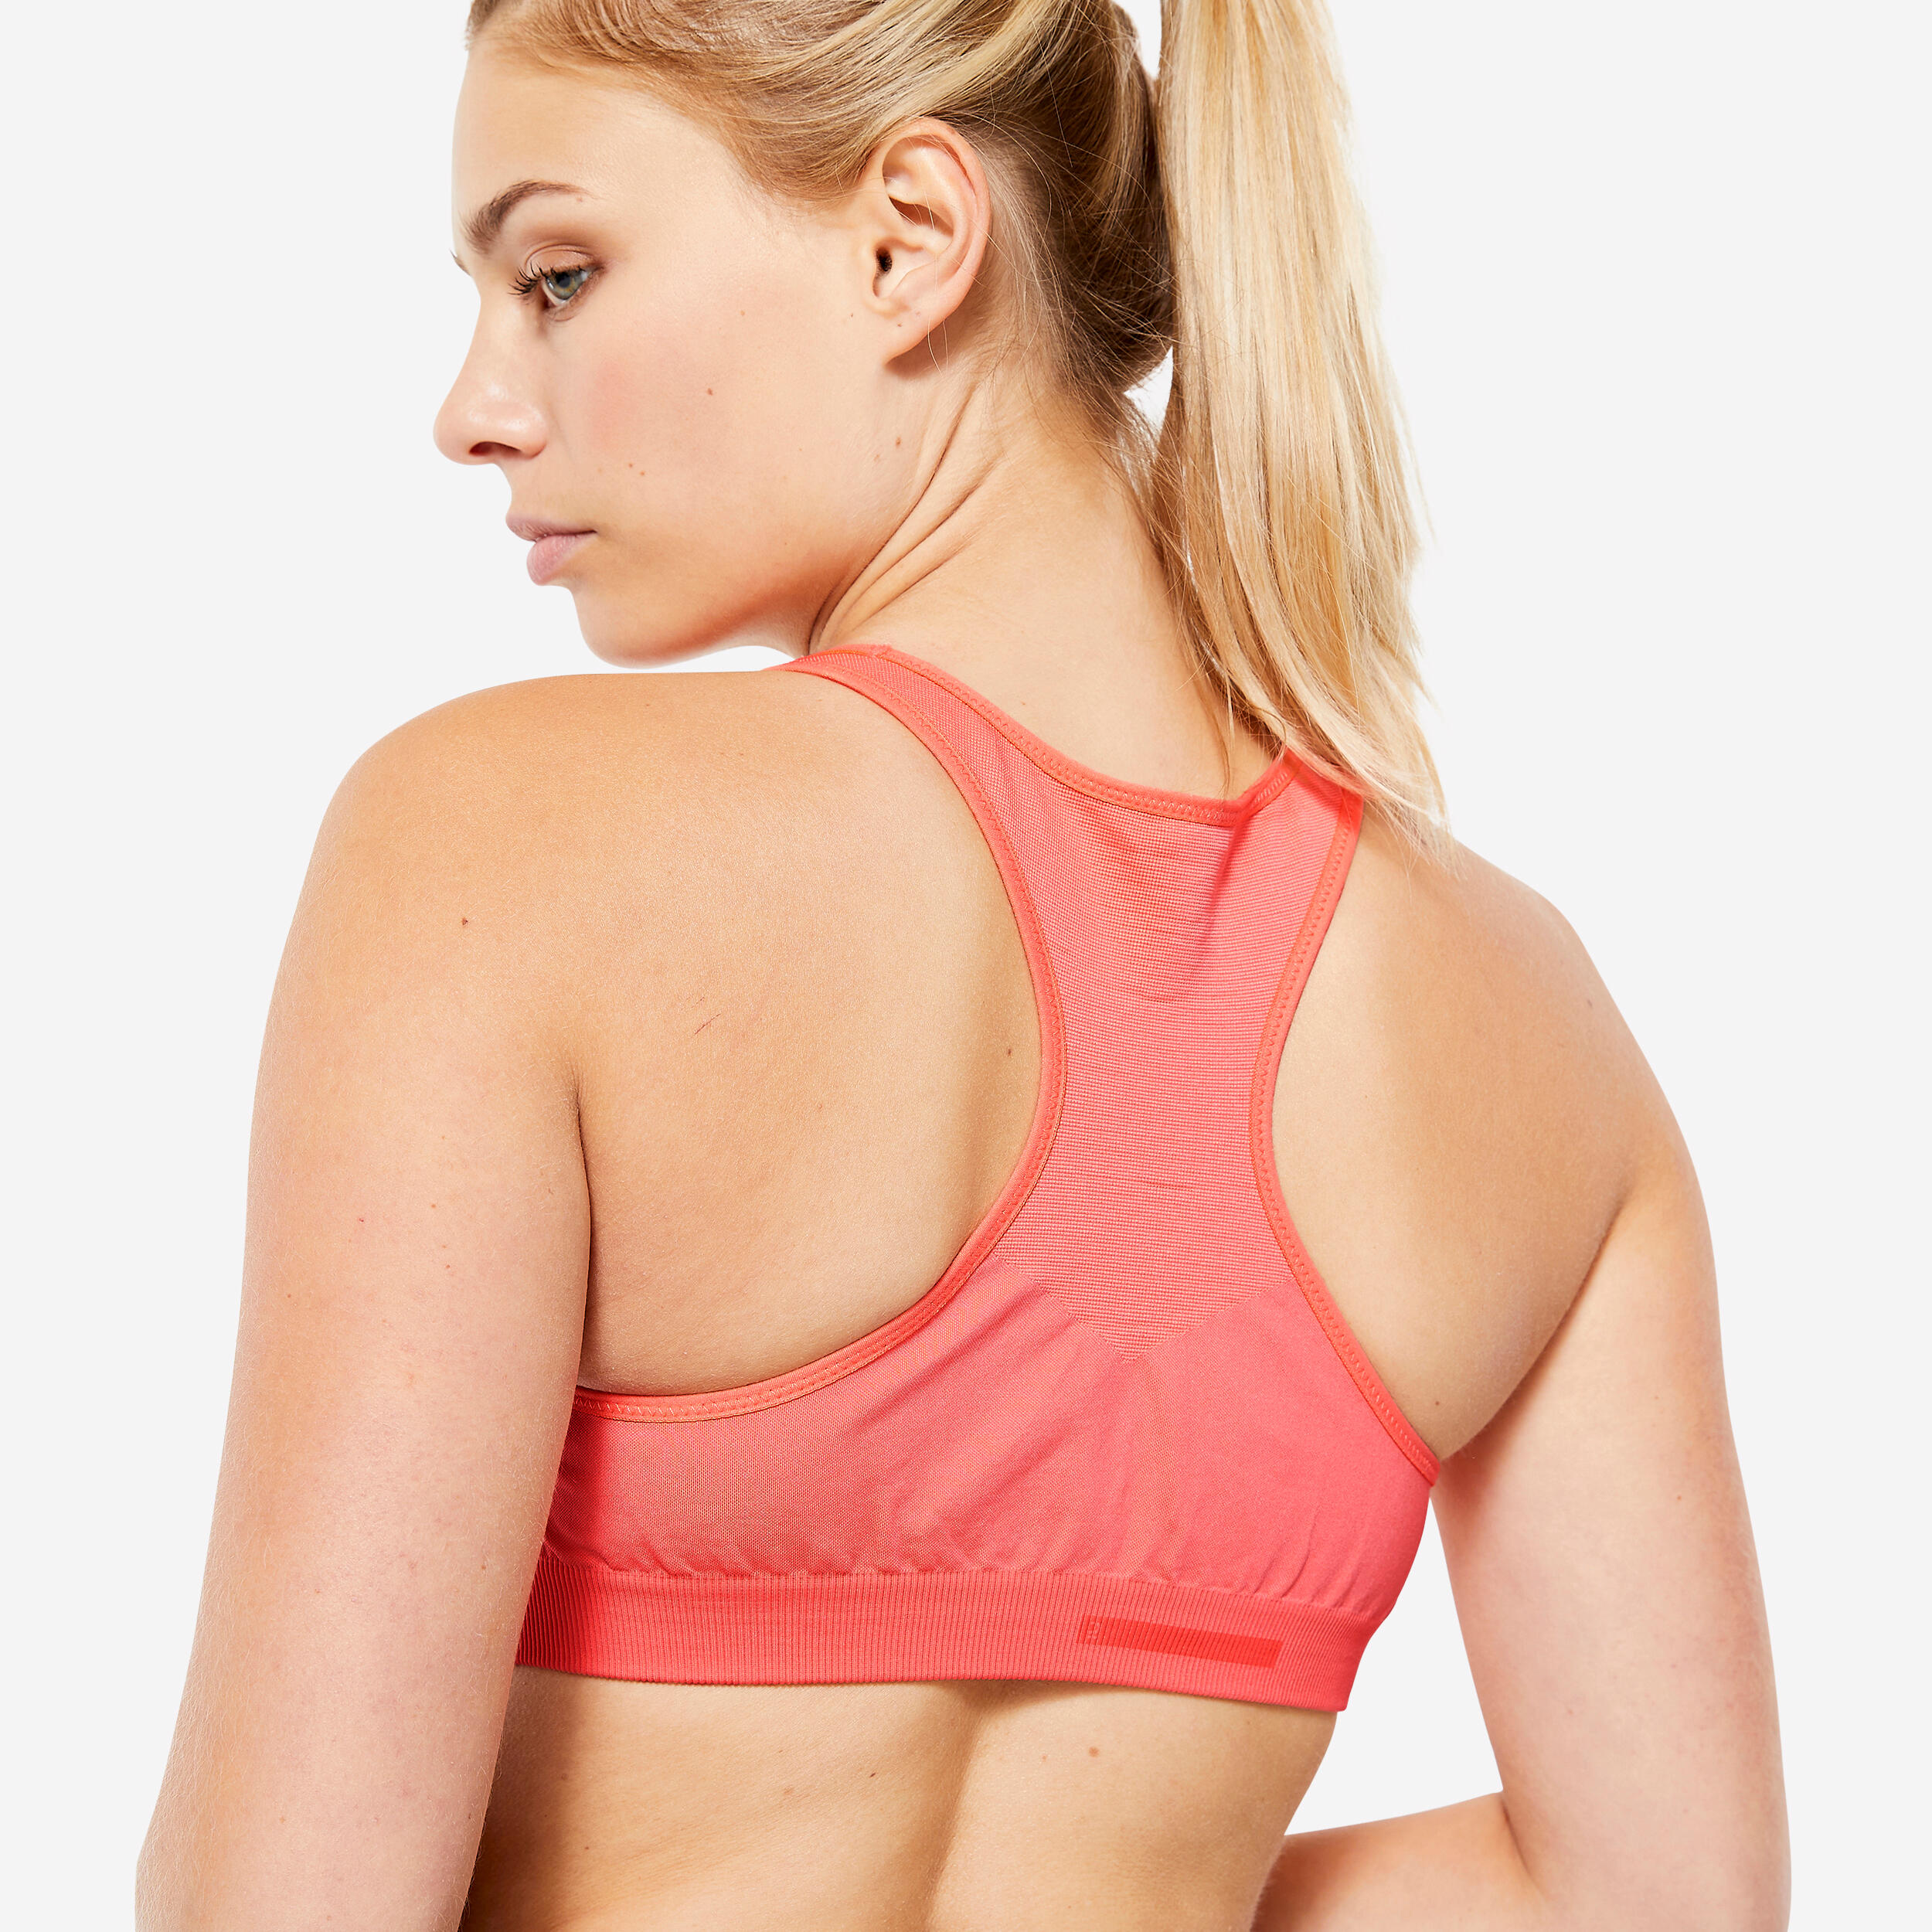 Women's Seamless, Muscle-Back, Moderate-Support Bra - Pink/Coral 5/6